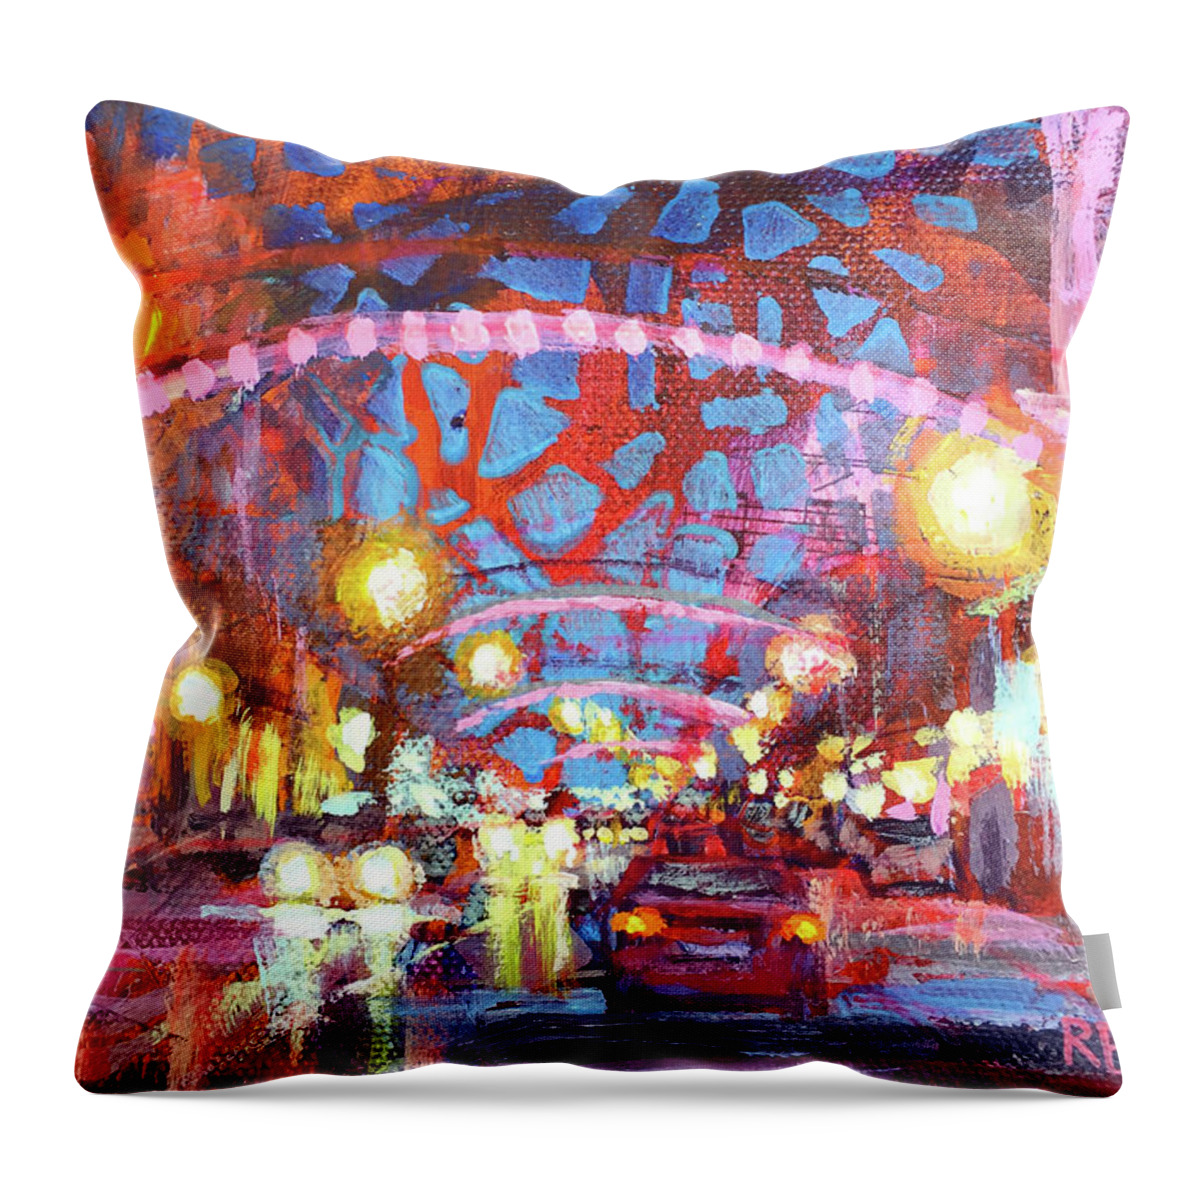 Festive Throw Pillow featuring the painting Colorful Short North by Robie Benve